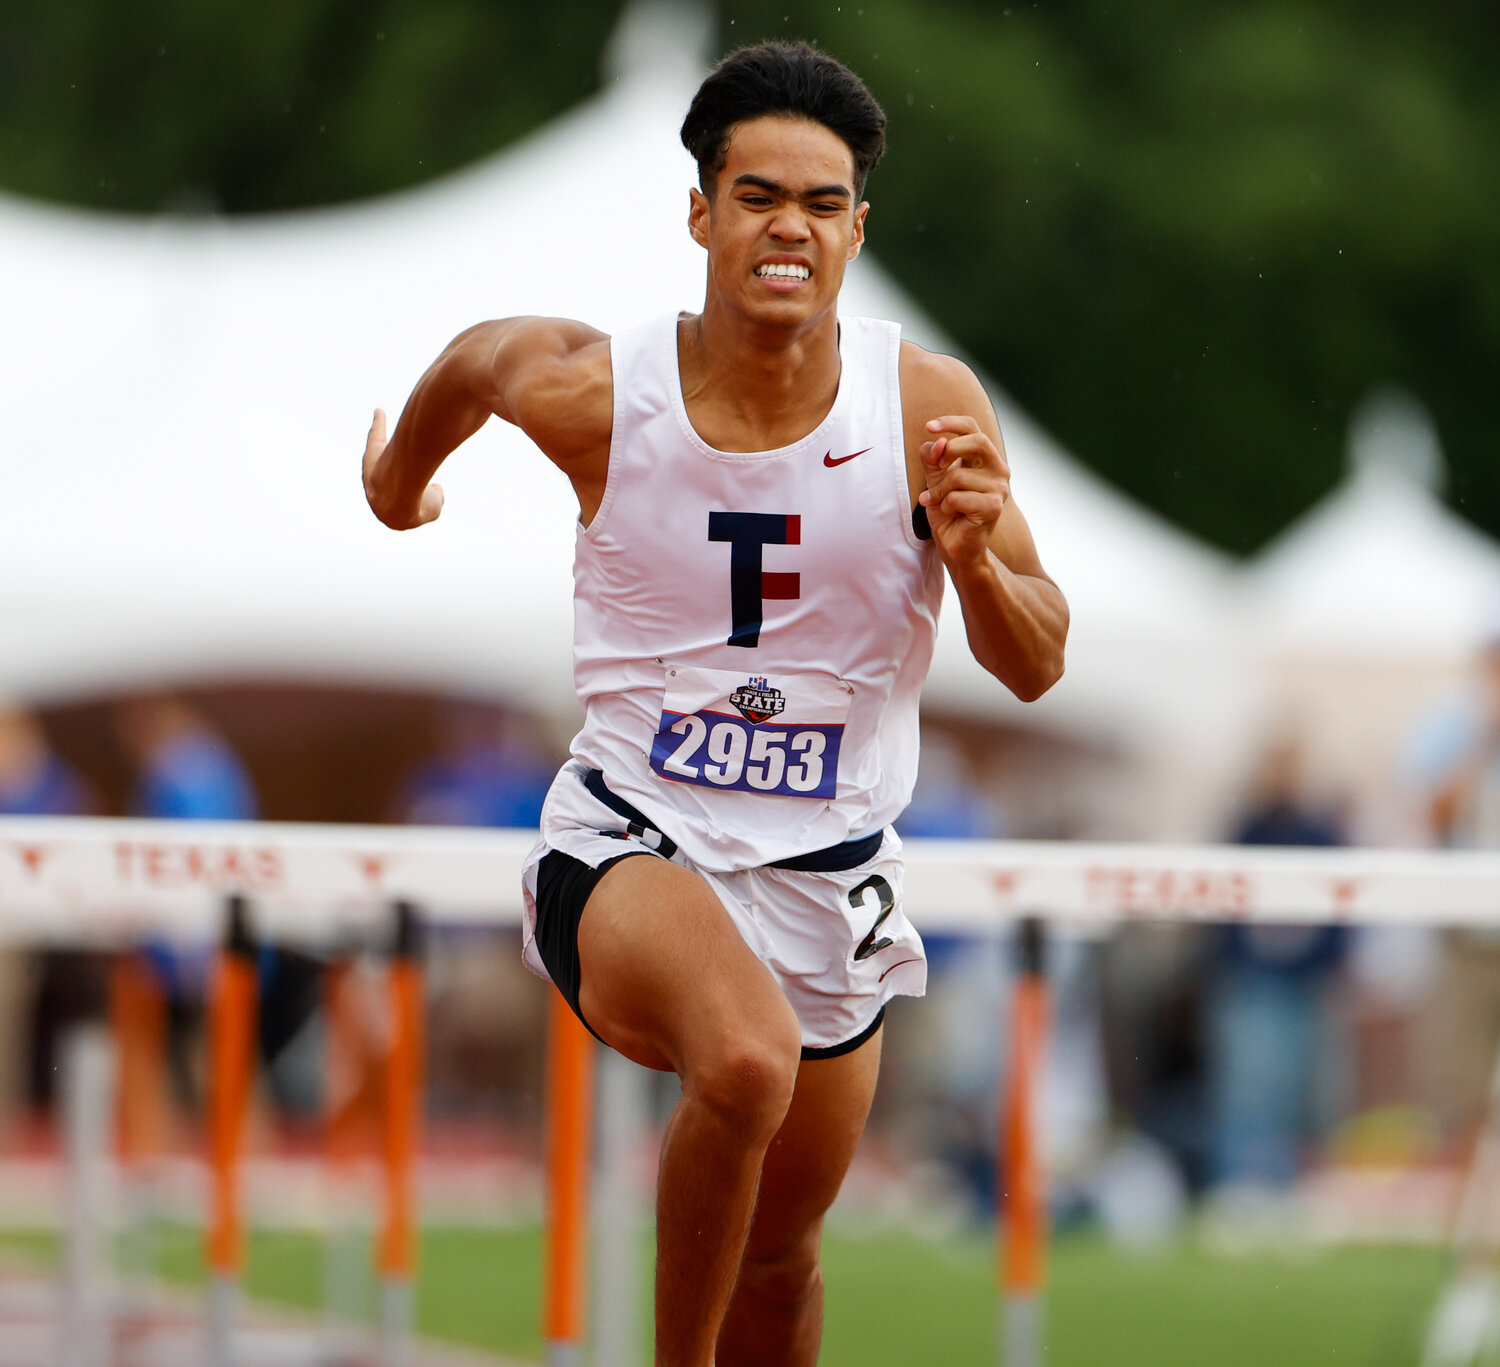 Jayden Keys of Tompkins High School (2953) crosses the finish line third, earning a bronze medal, in the Class 6A boys 110-meter hurdles during the UIL State Track and Field Meet on Saturday, May 13, 2023 in Austin.